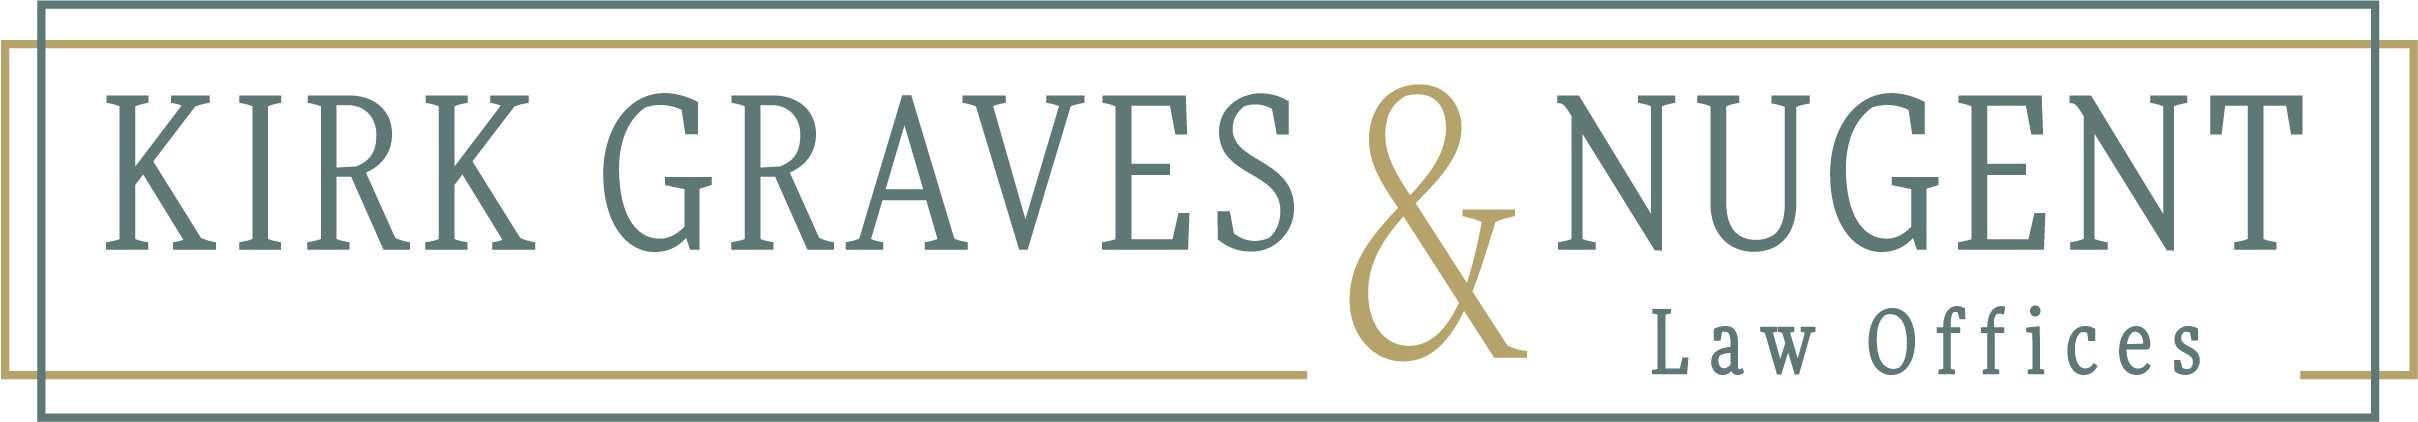 Kirk Graves & Nugent Law Offices